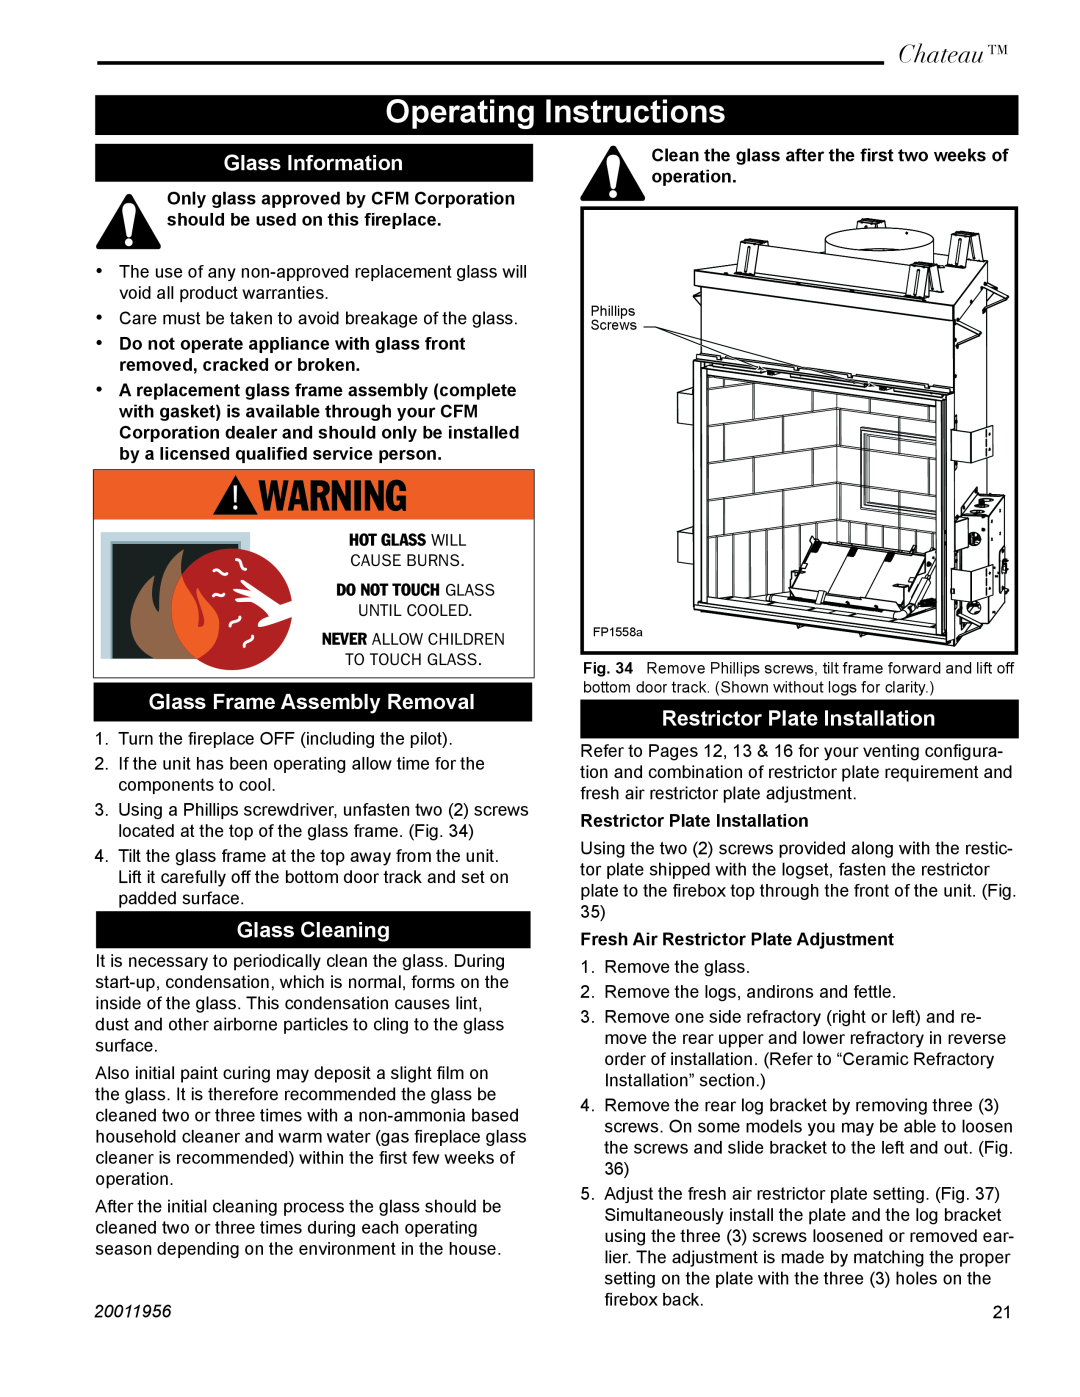 Vermont Casting DVT44 Operating Instructions, Glass Information, Glass Frame Assembly Removal, Glass Cleaning, Chateau 